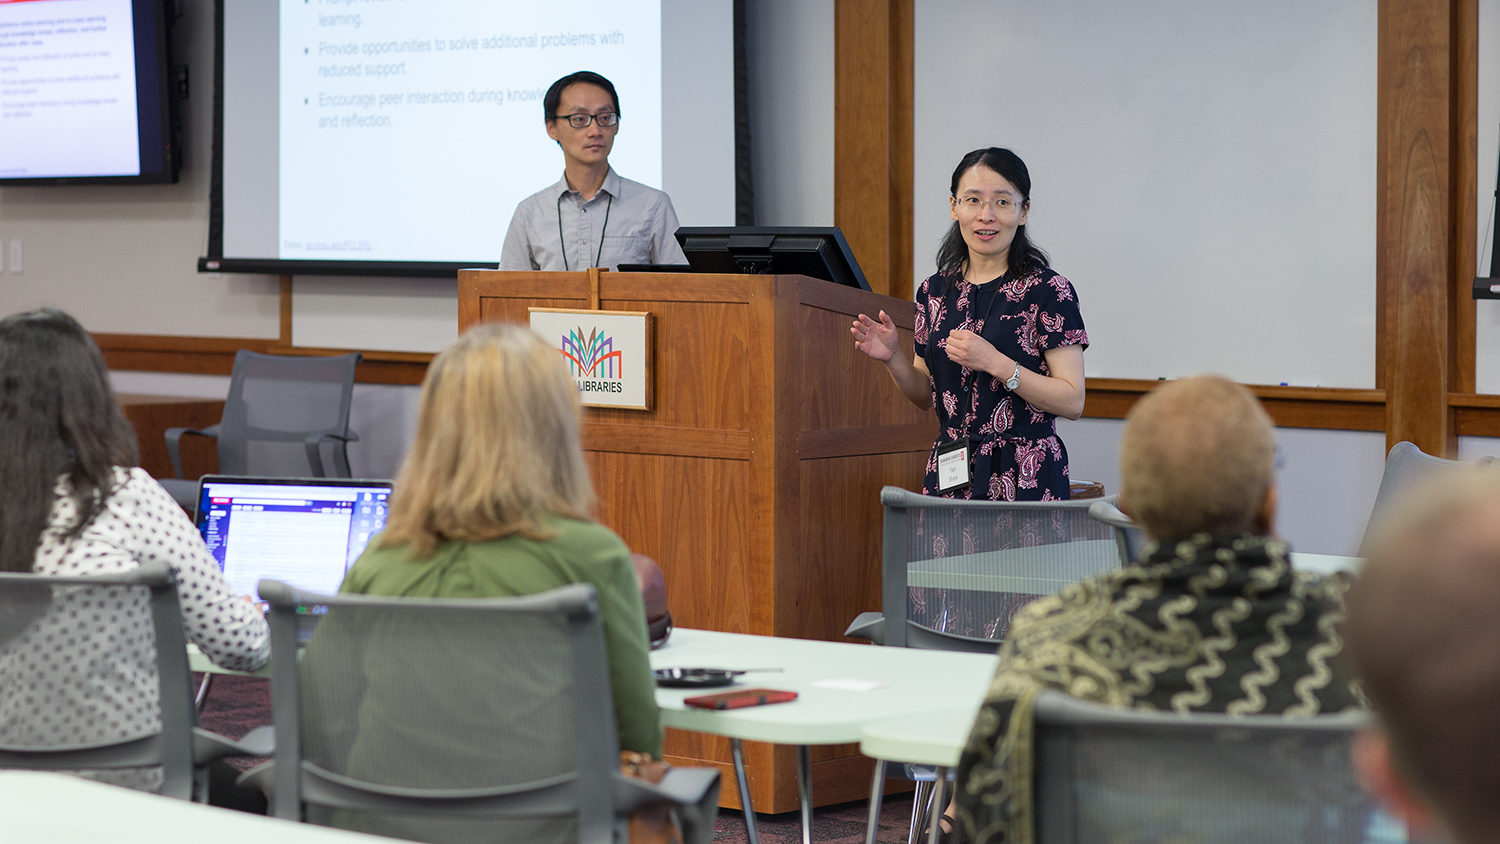 Instructional Designer Yan Shen (right) gives a presentation at the 2018 Summer Shorts. Yan is pictured at the front of the room with participants in the crowd.